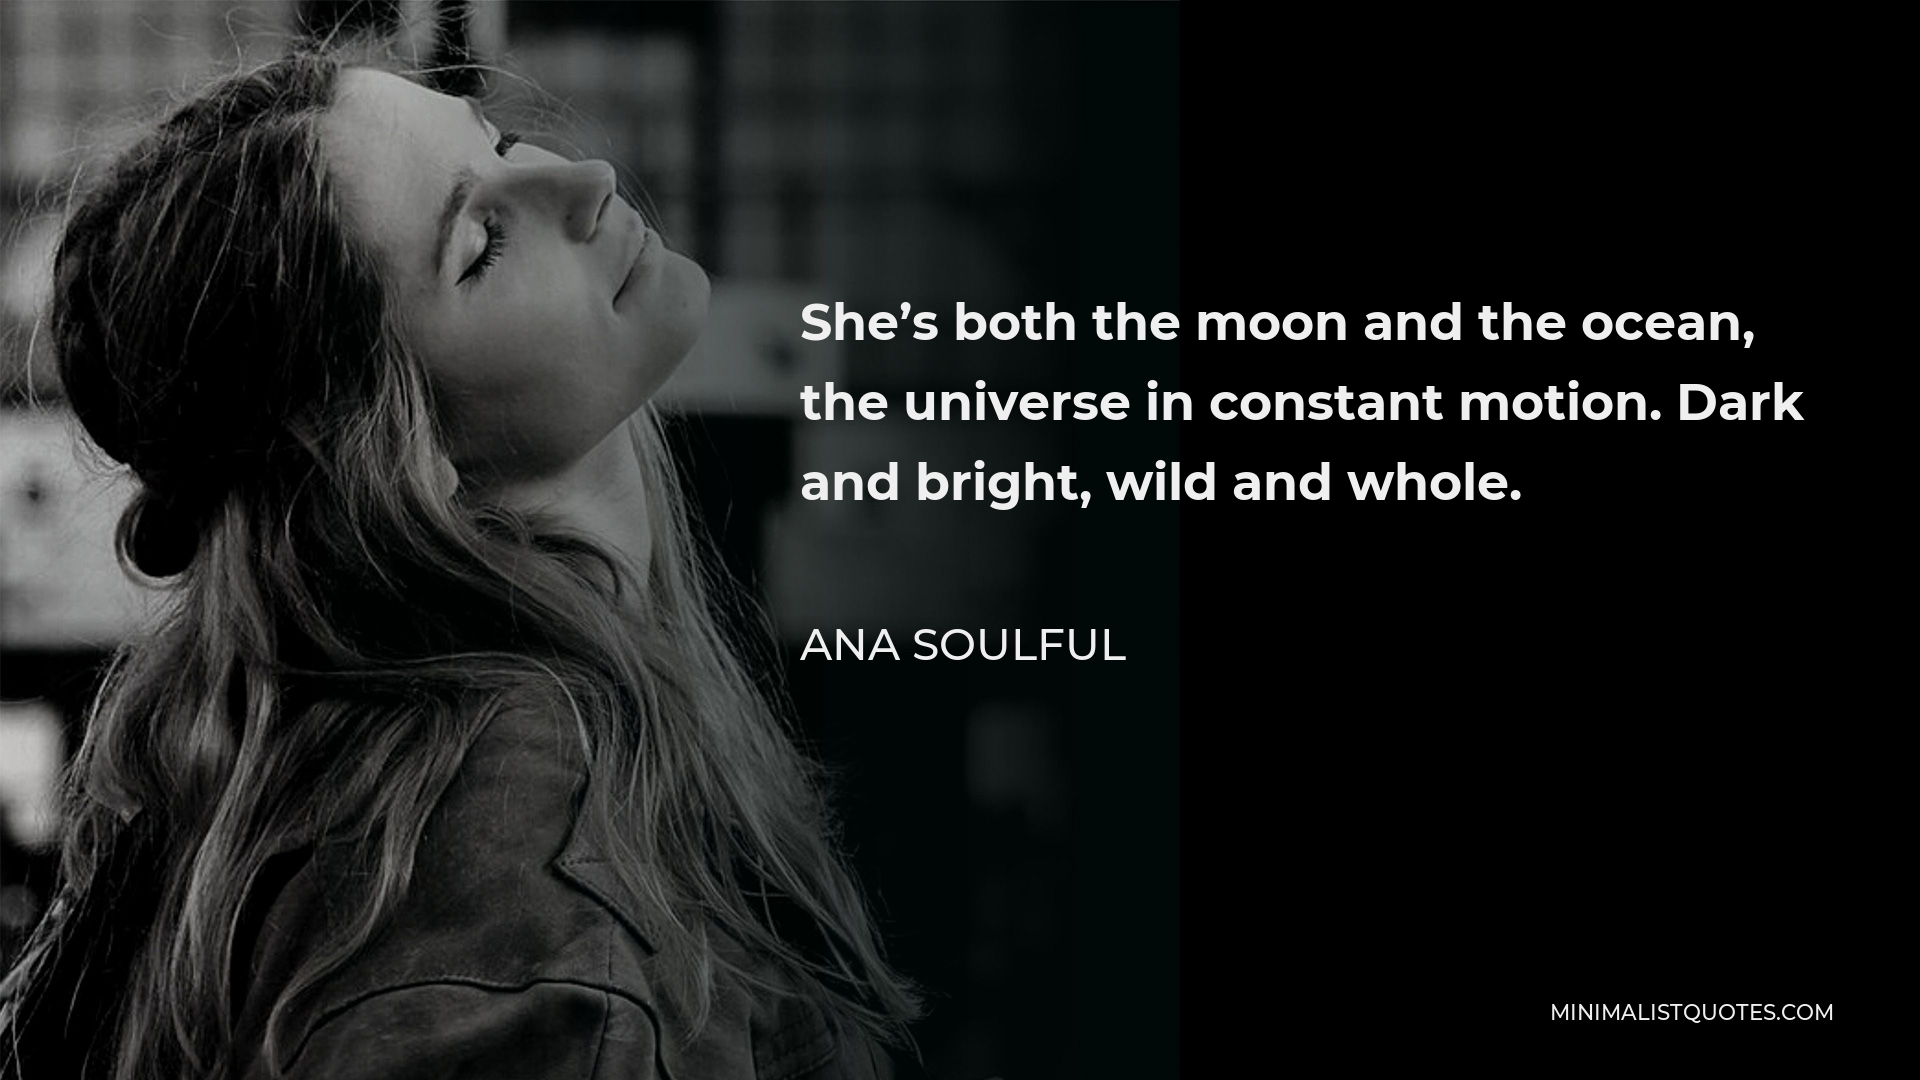 Ana Soulful Quote - She’s both the moon and the ocean, the universe in constant motion. Dark and bright, wild and whole.